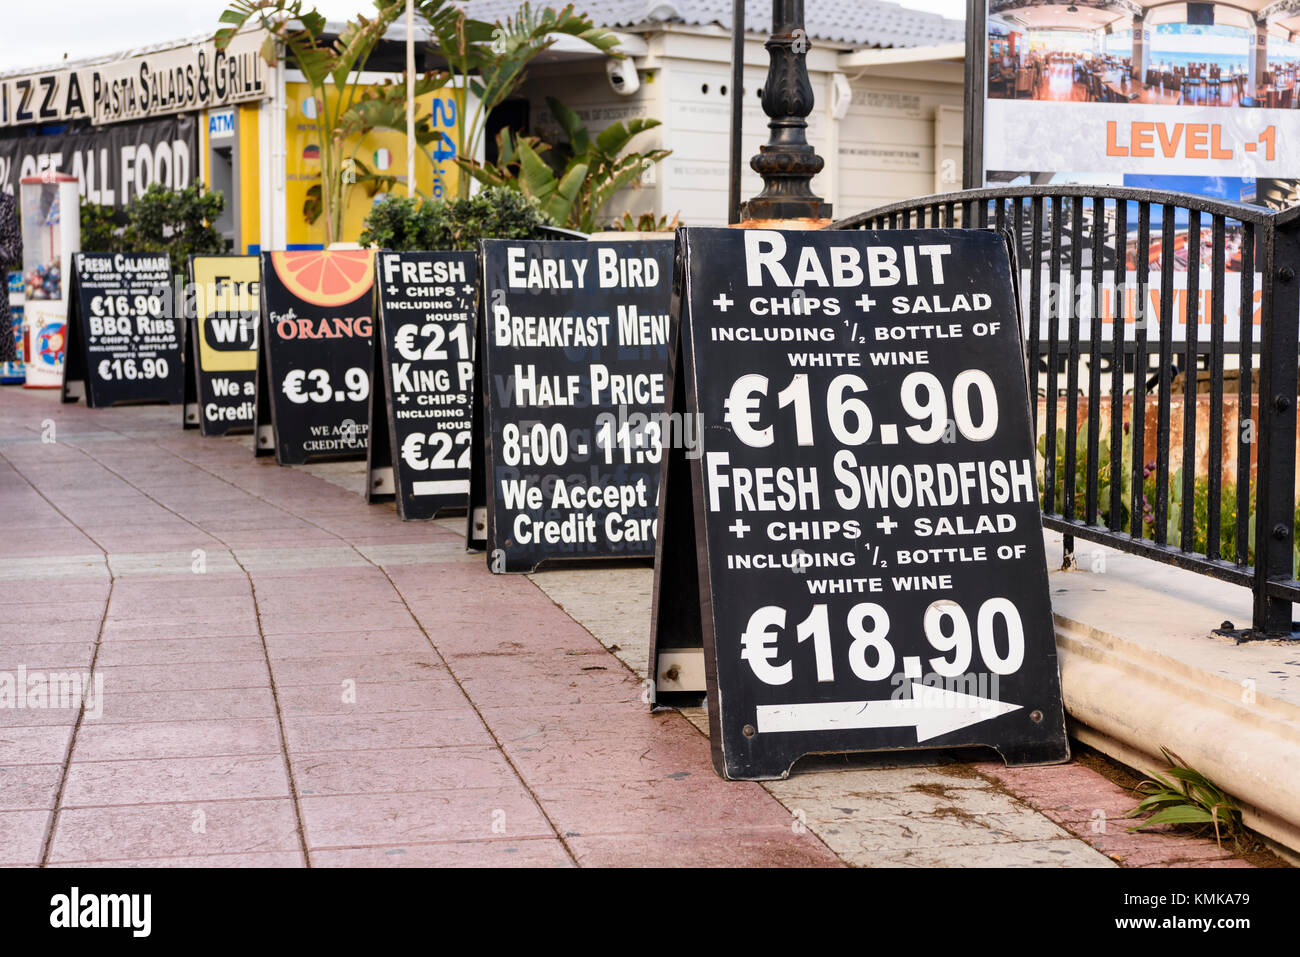 A-boards advertising food including rabbit and swordfish outside a restaurant in Malta. Stock Photo